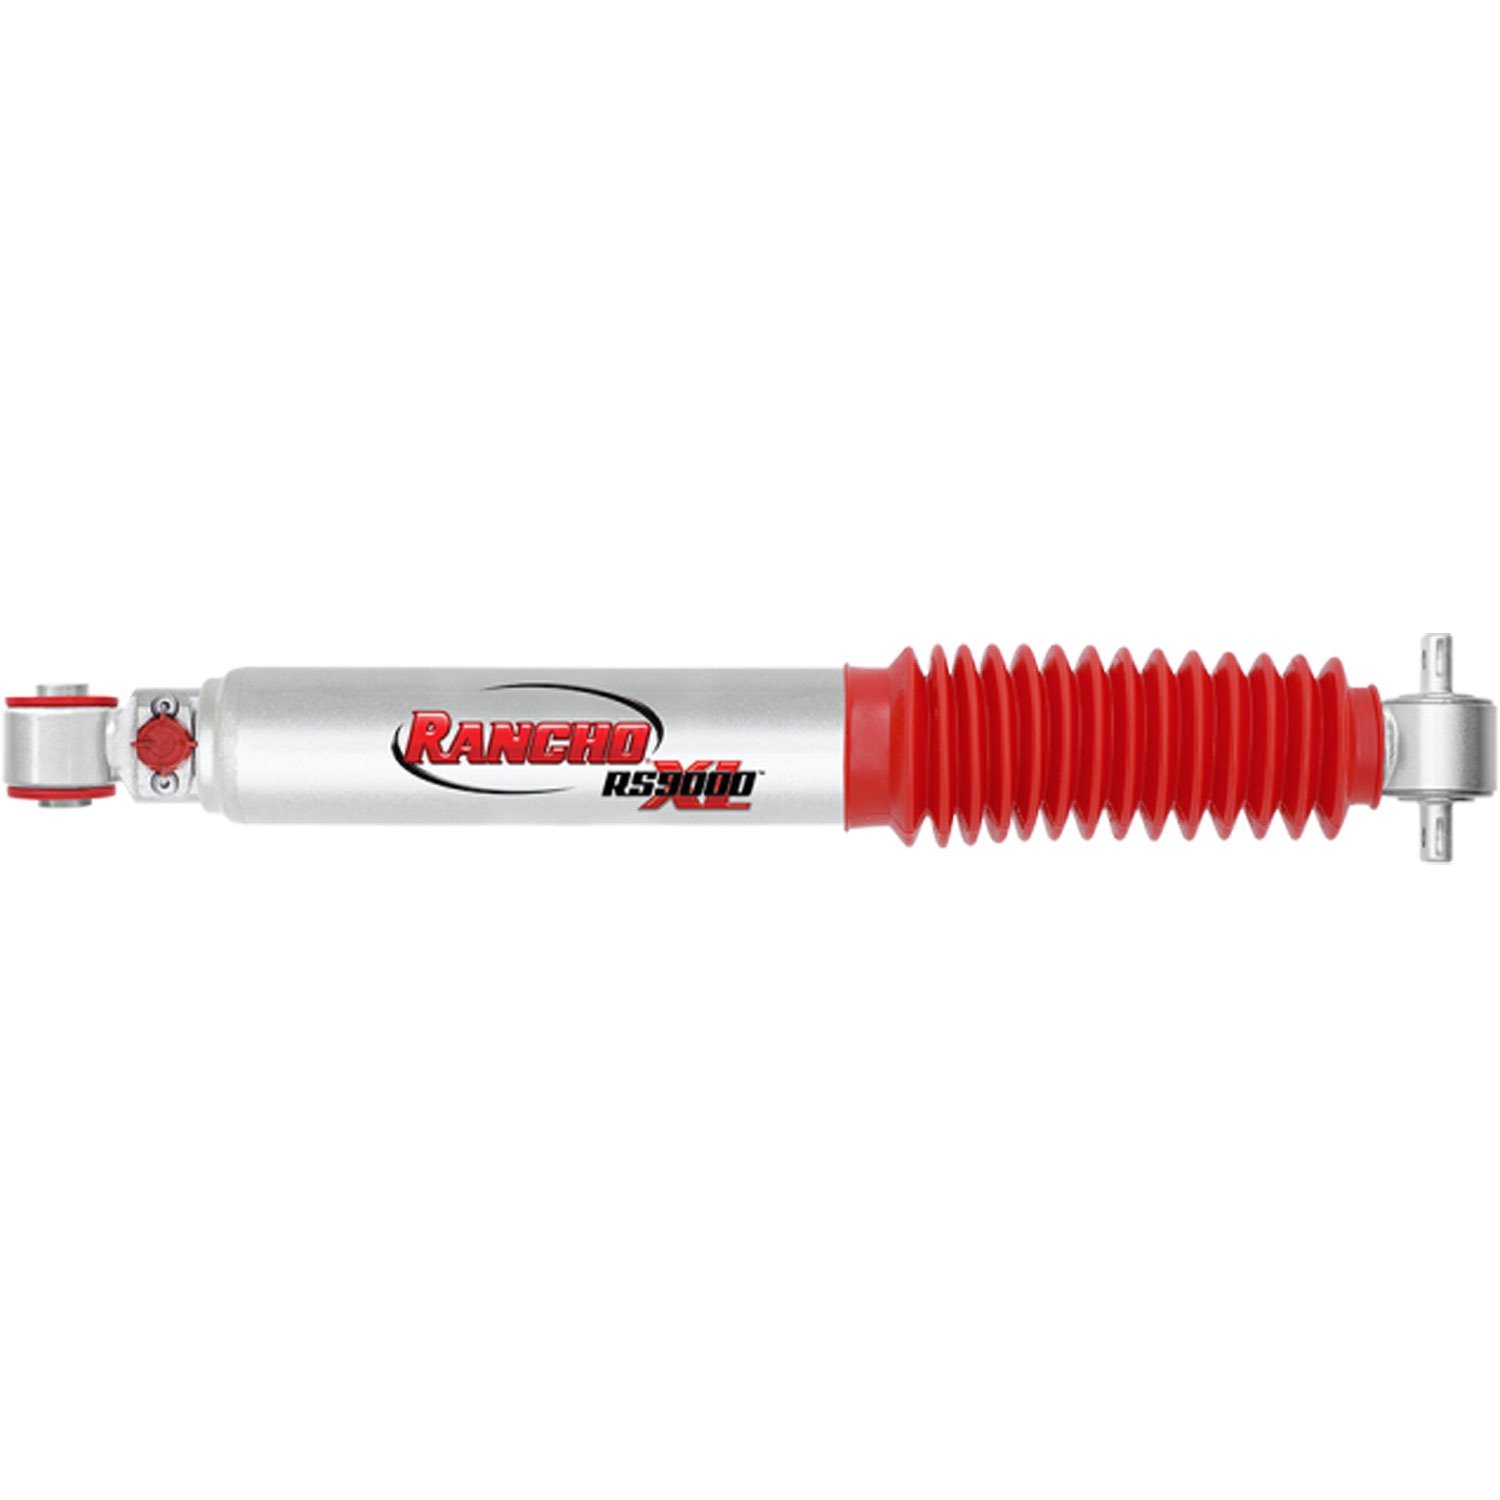 RS9000XL Rear Shock Absorber Fits GM 1500 Pickup and Fullsize SUVs